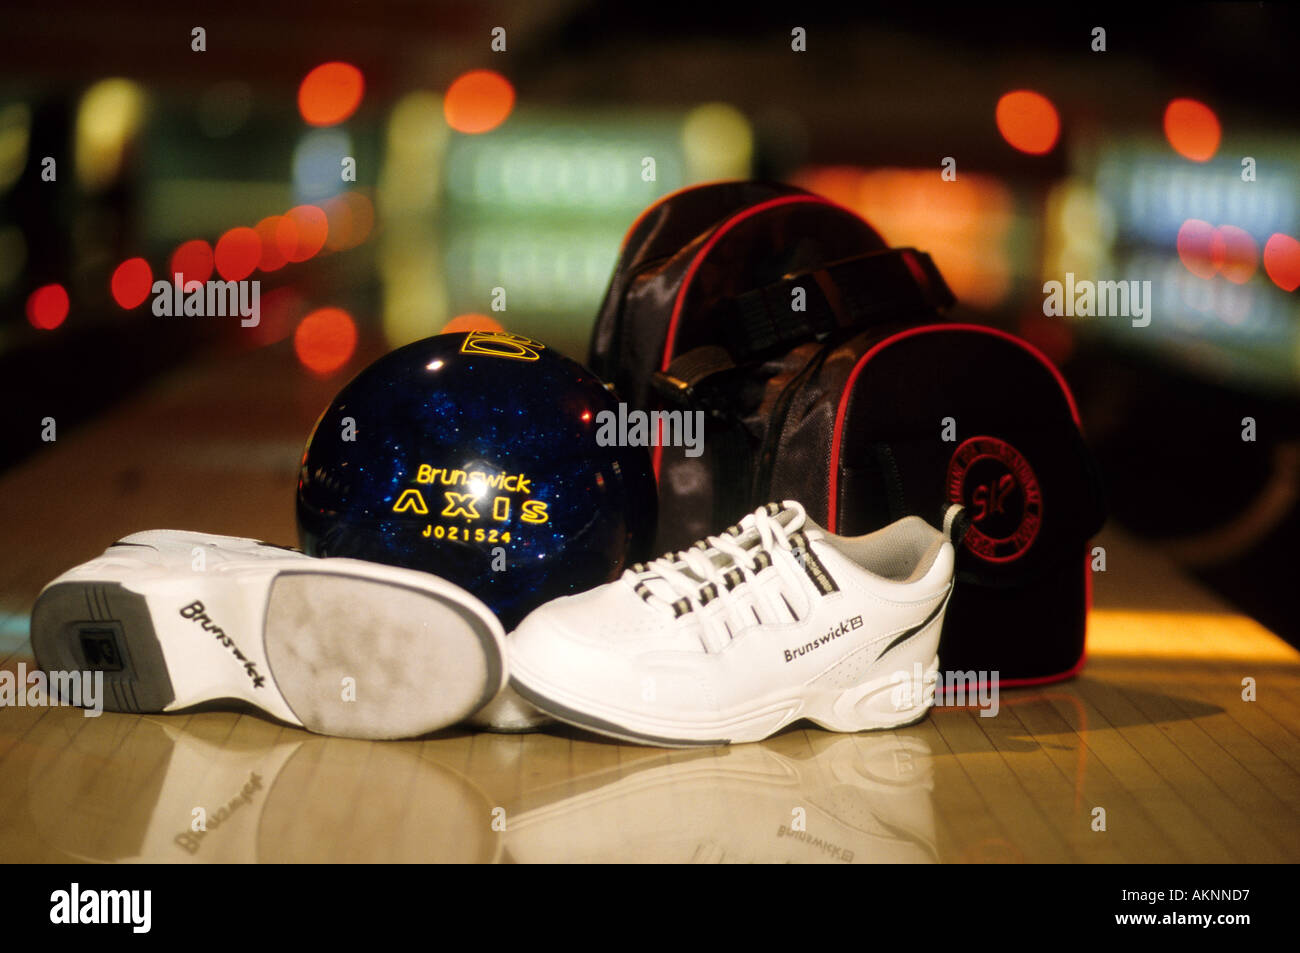 Germany Free time At a bowling alley shoes ball and rucksack  Stock Photo